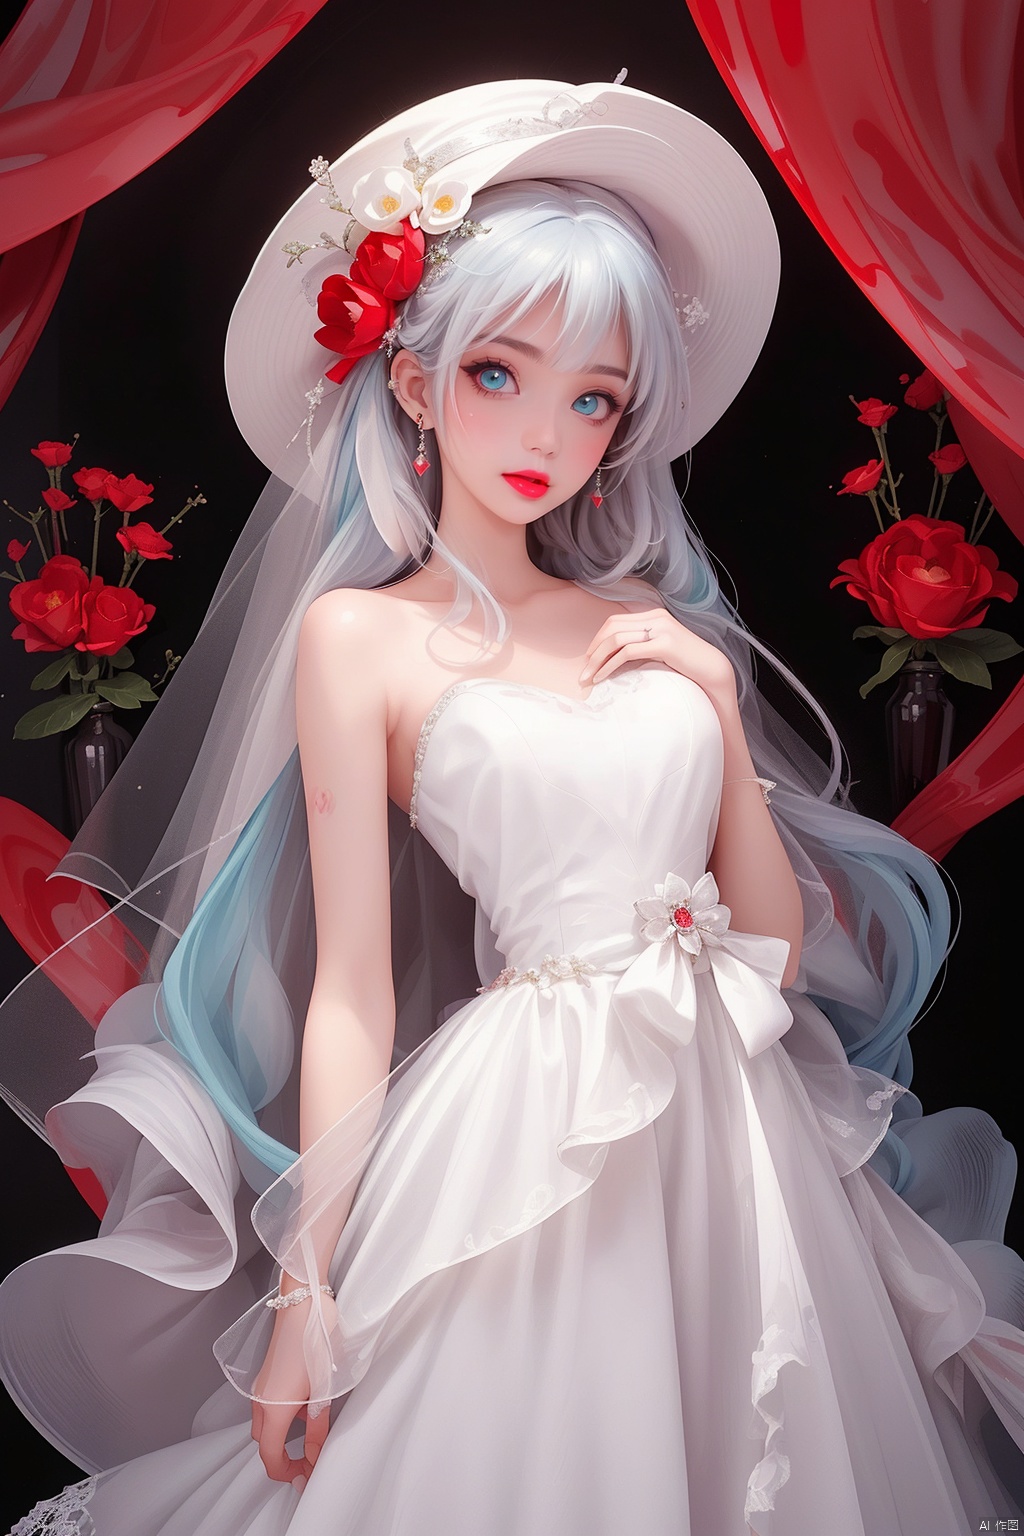  1 girl, solo,thin and tall,loli, aqua eyes, multicolored eyes, ((Eye highlight)), ((Red glossy lip gloss)), Earrings, bangs, long hair,wedding dress,Wedding Hat,flowertheme,
(((masterpiece,best quality))),((good structure)),((Good composition)), ((clear, original,beautiful)), (clear details, clear light,clear structure),